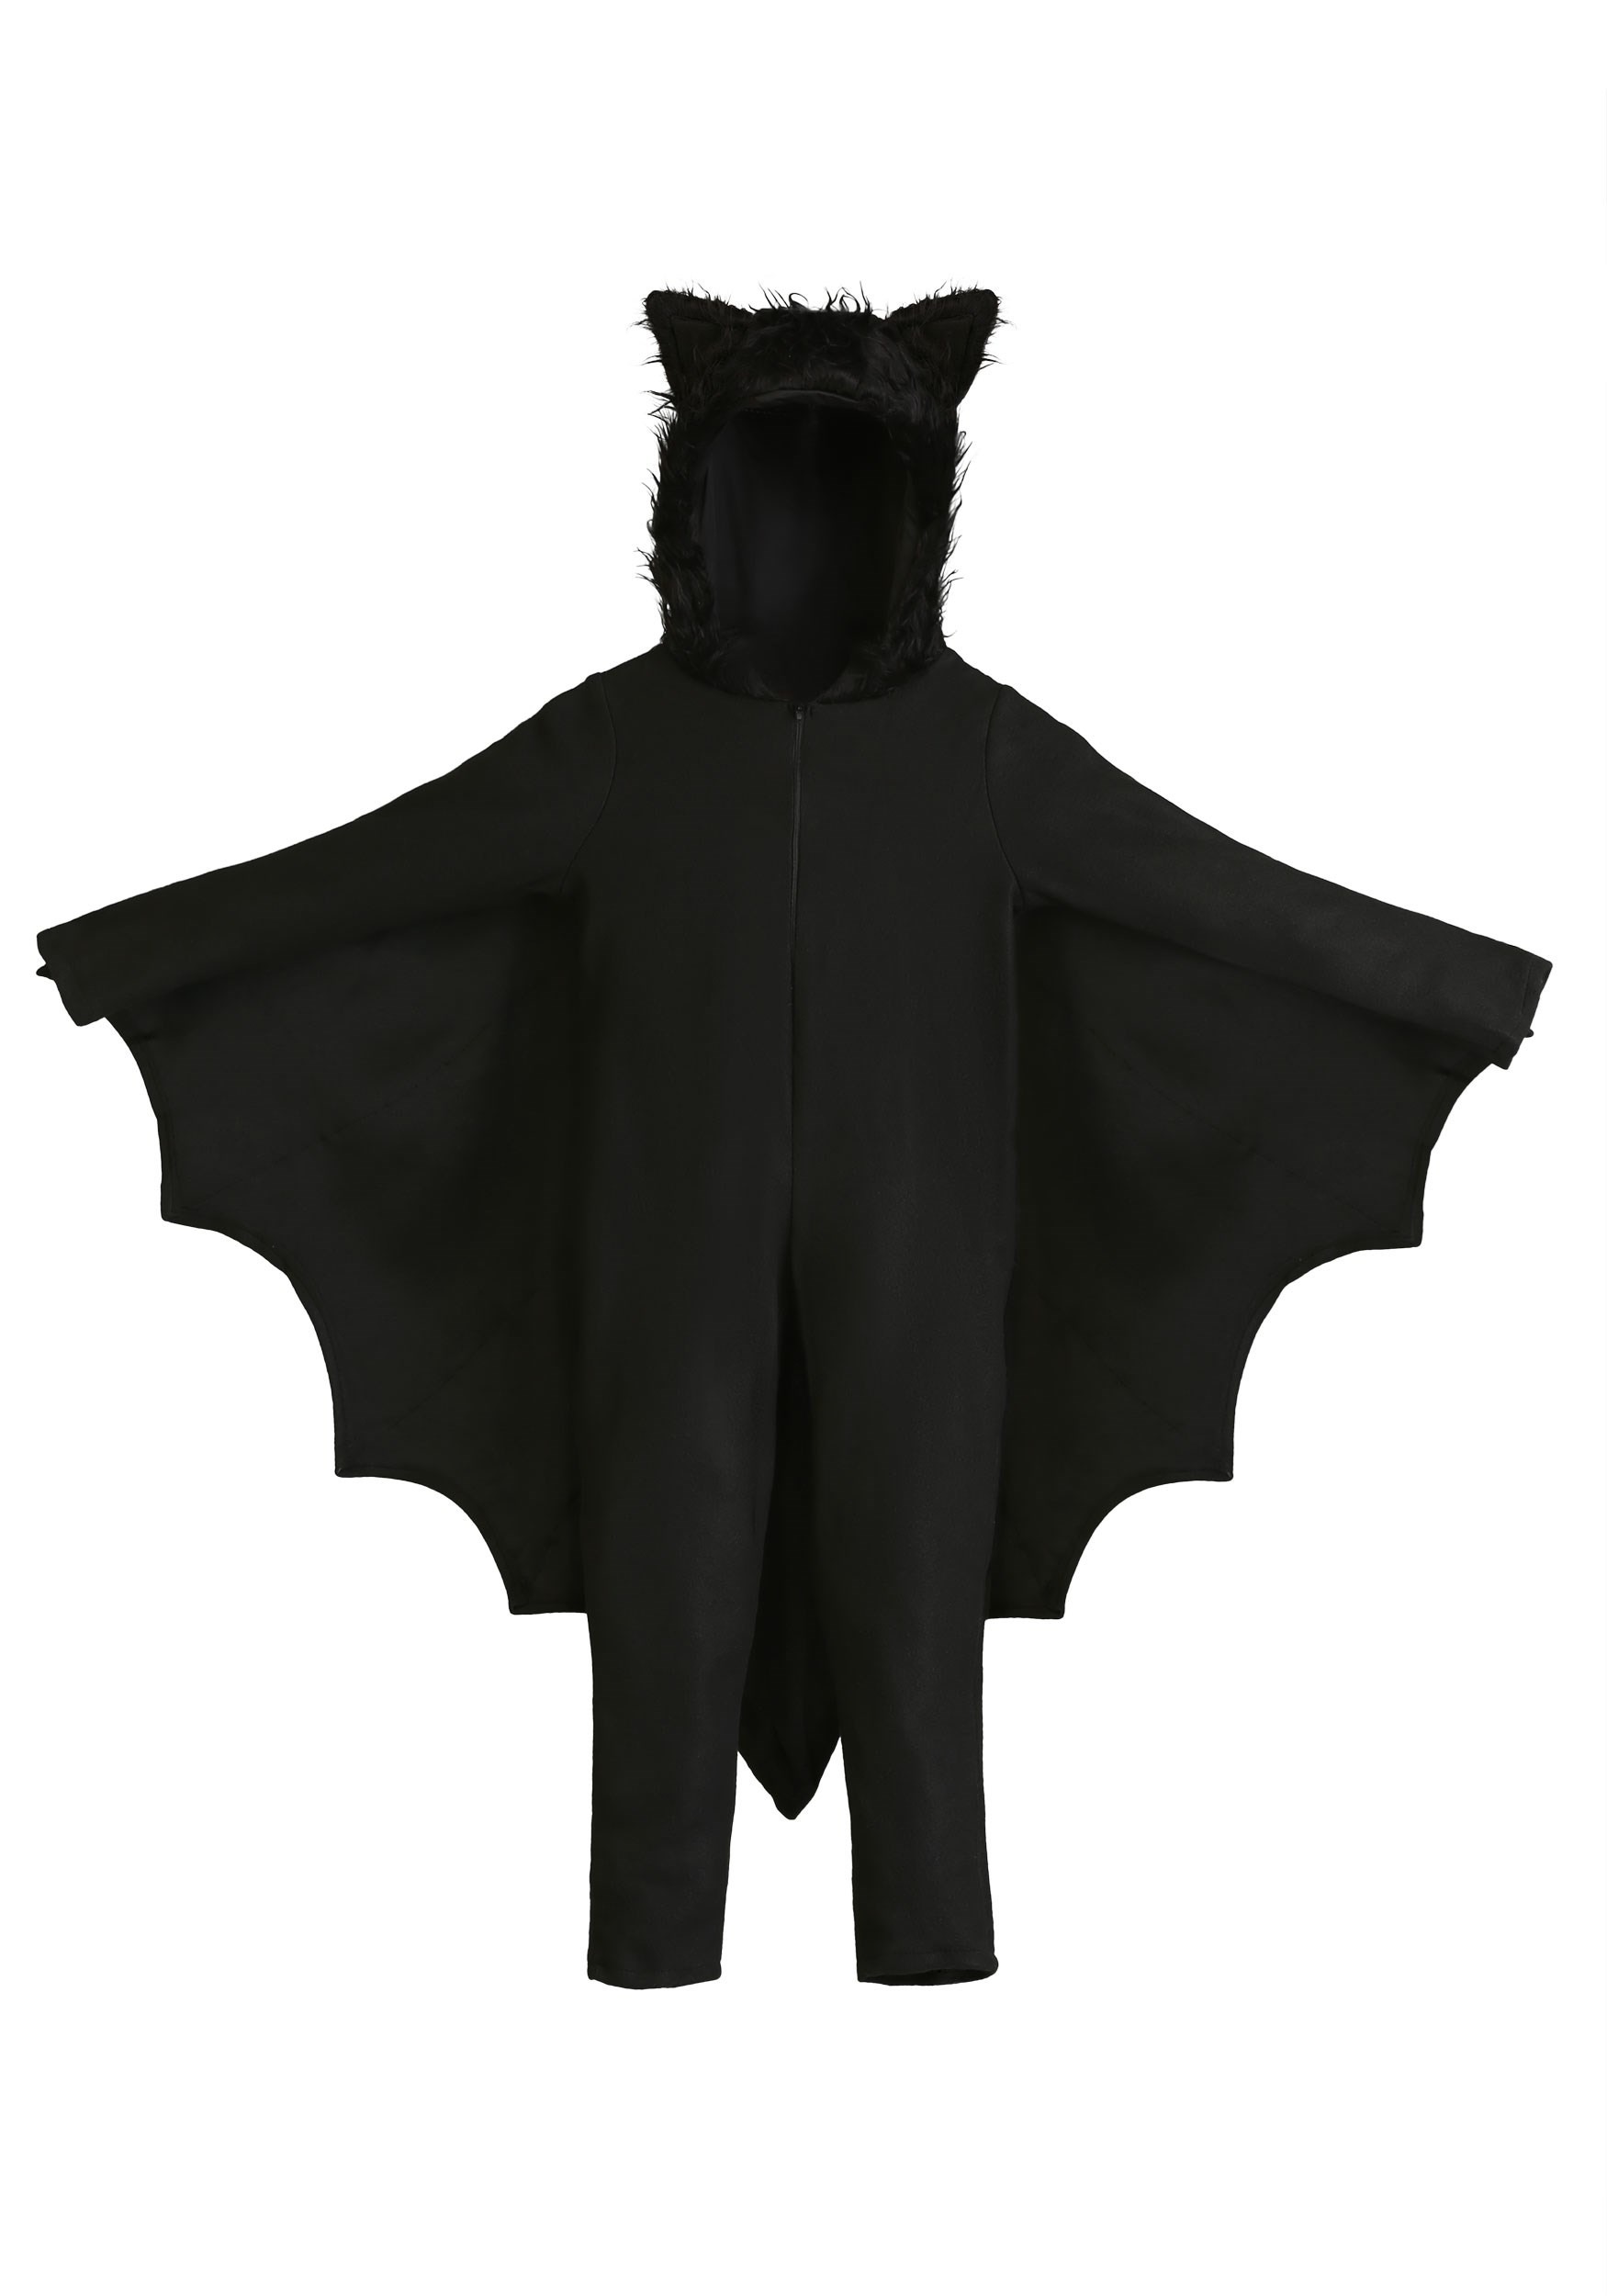 toddler-fleece-bat-costume-exclusive-made-by-us